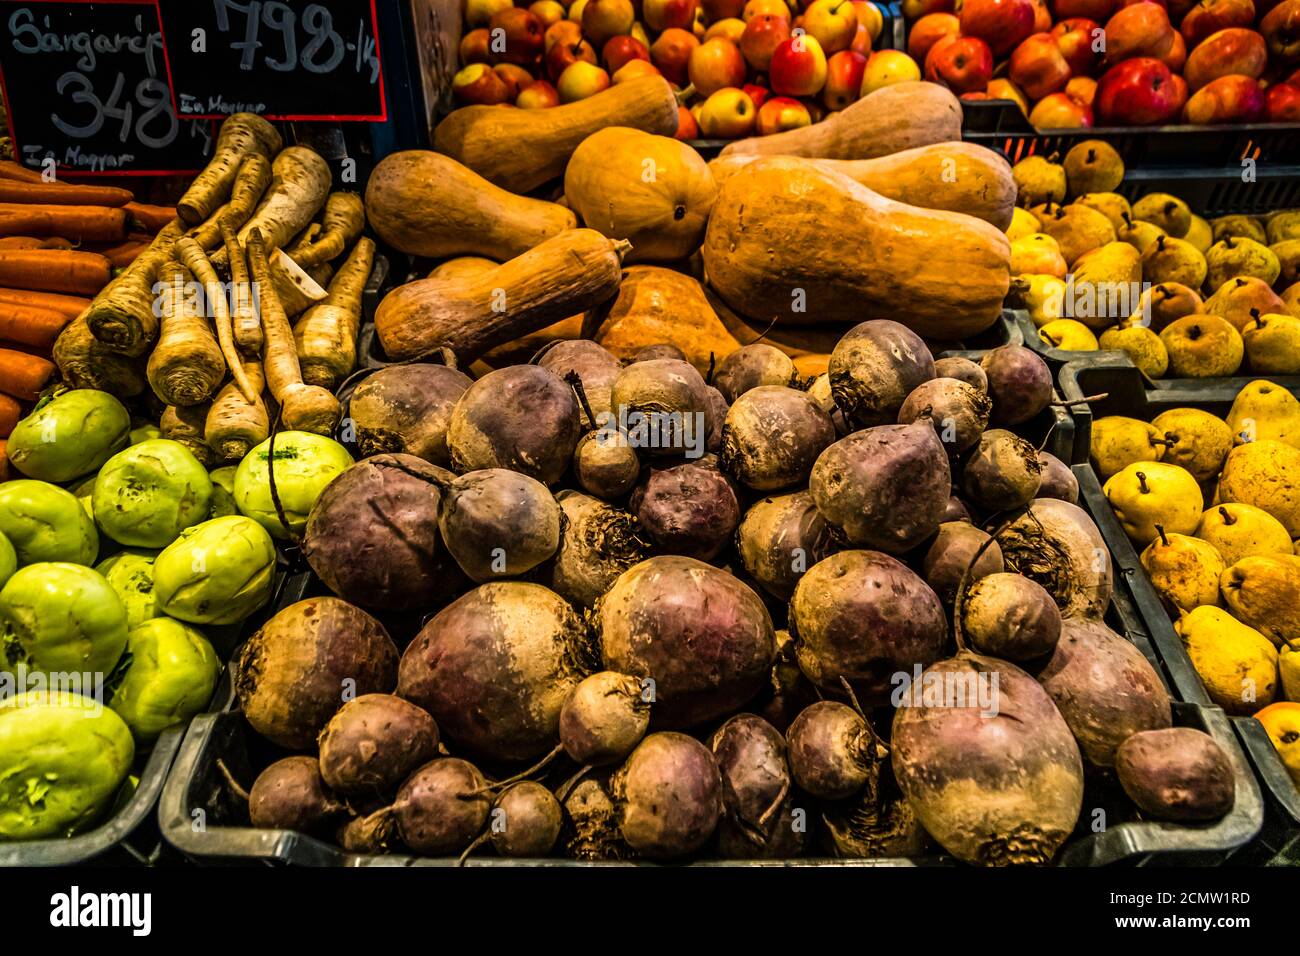 Vegetables and fruits in the Great Market Hall in the IX. district of Budapest, Hungary Stock Photo